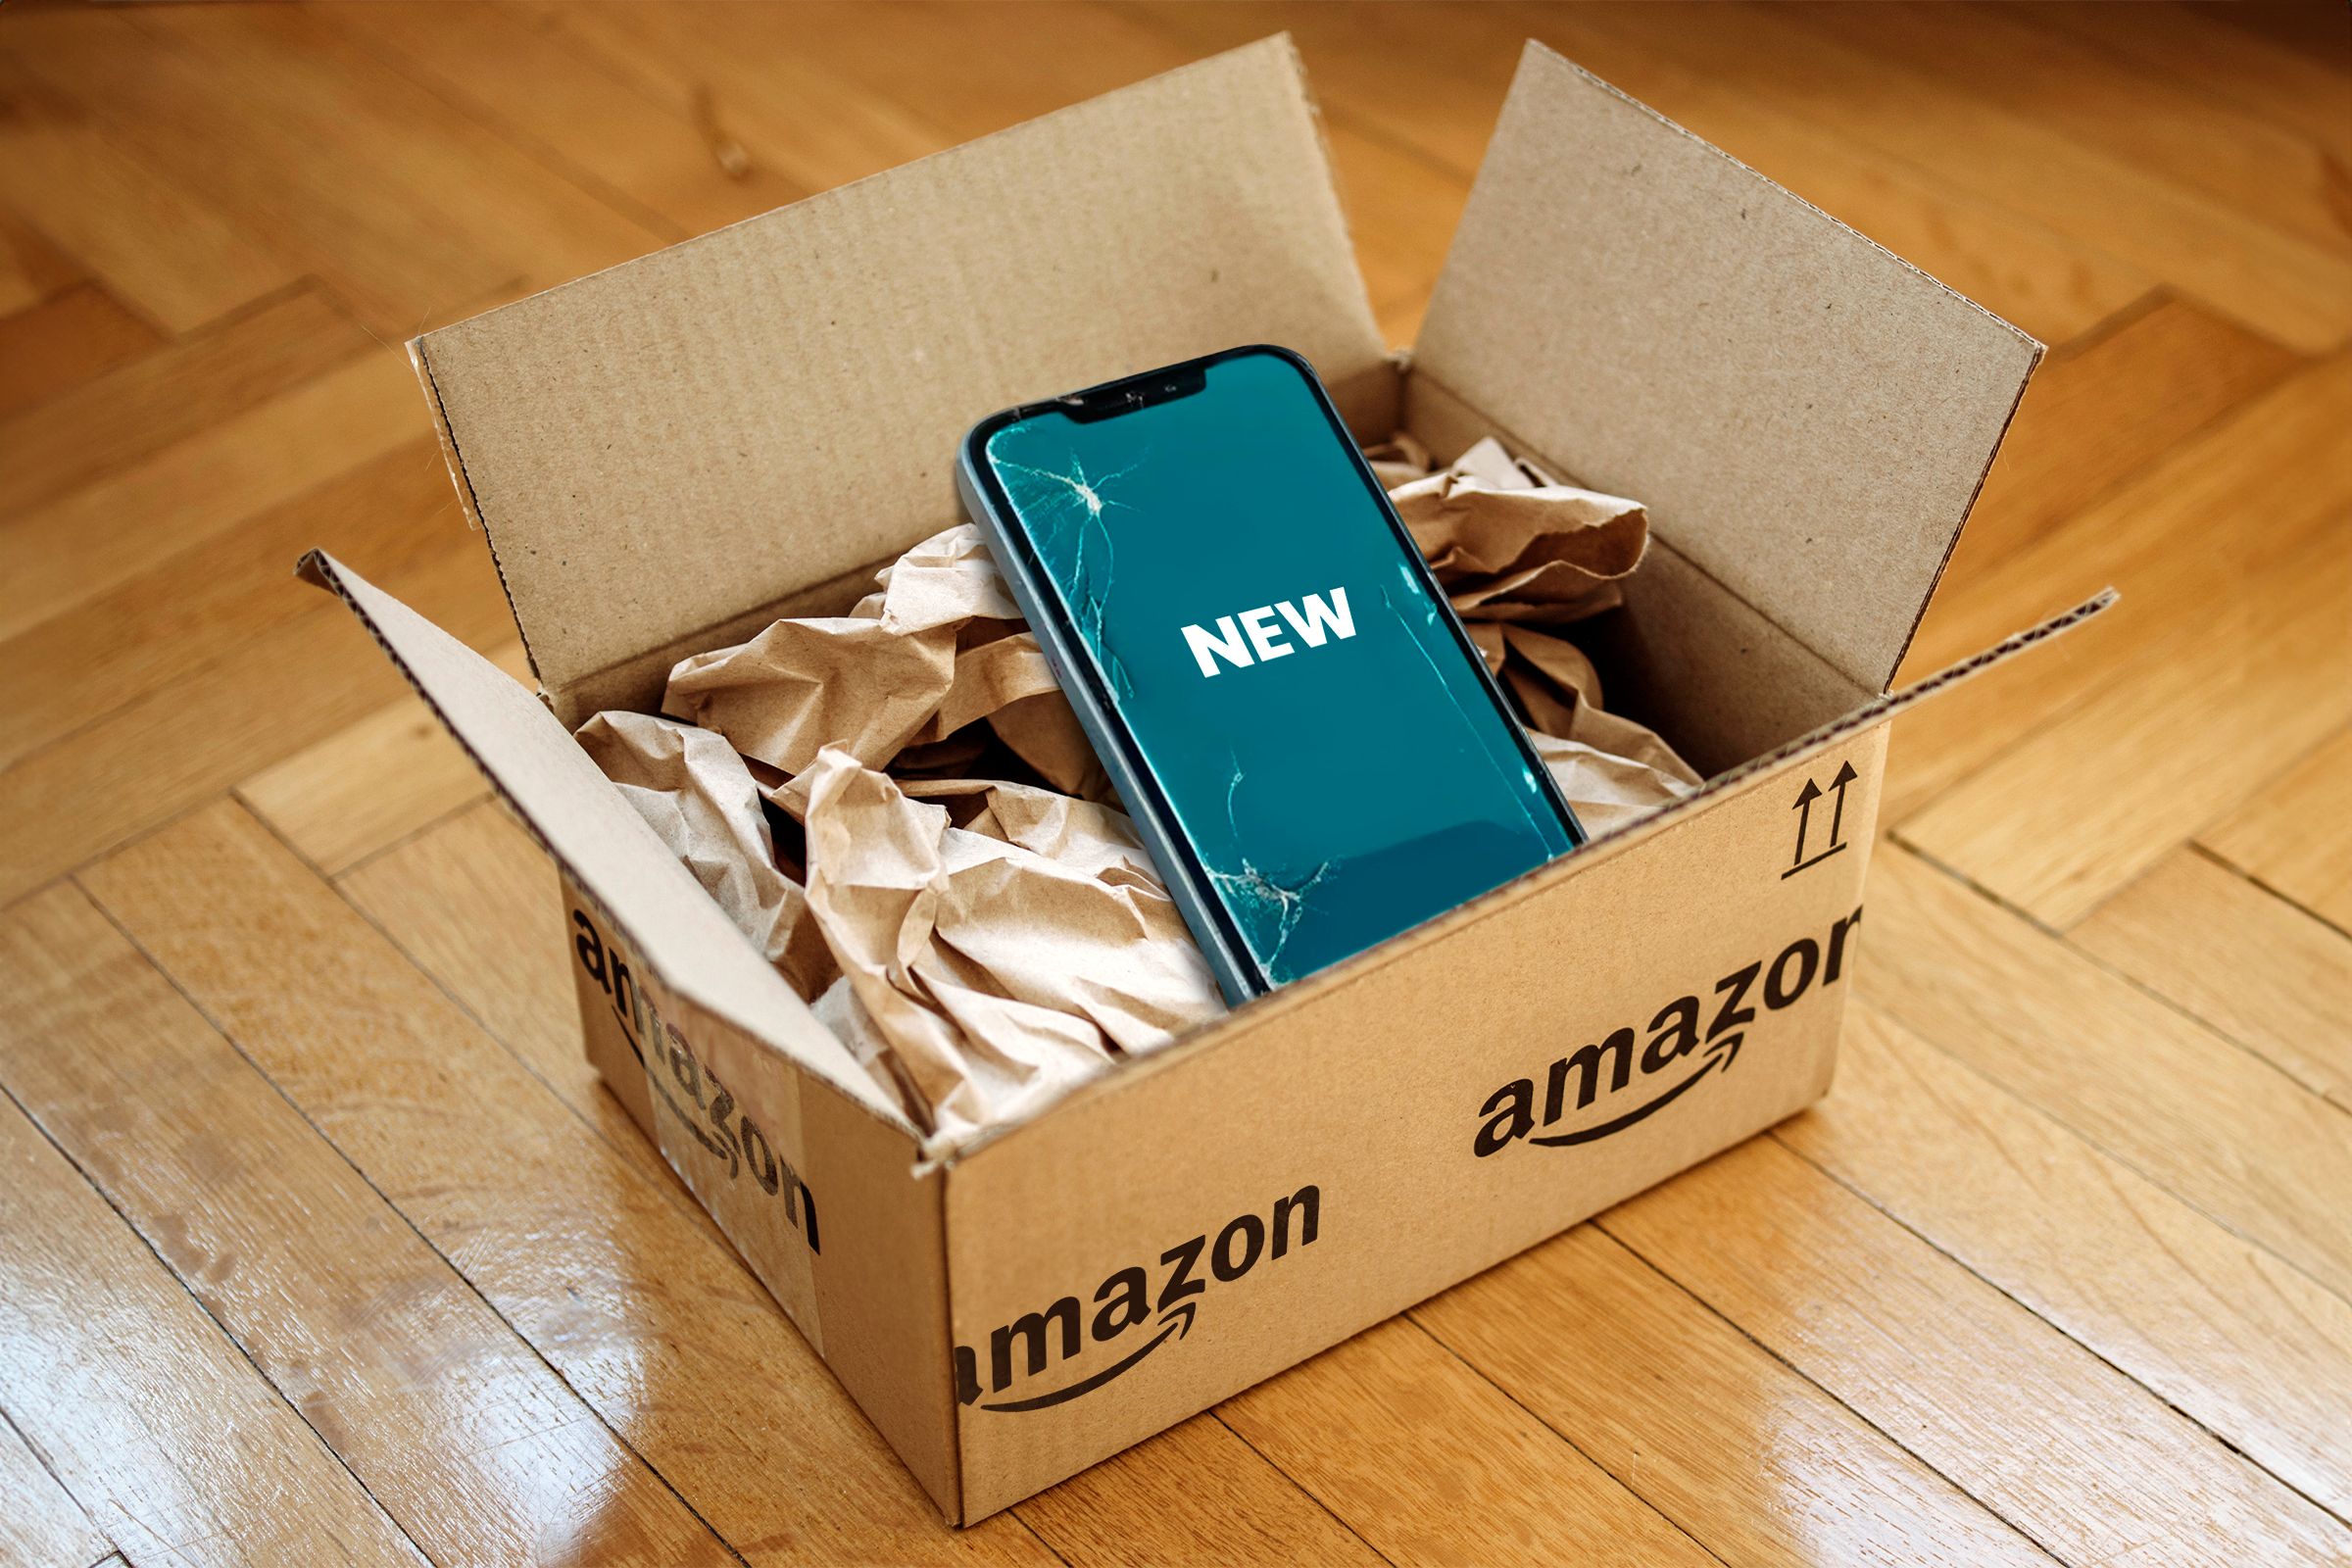 Amazon box with a visibly used product labeled 'new'.